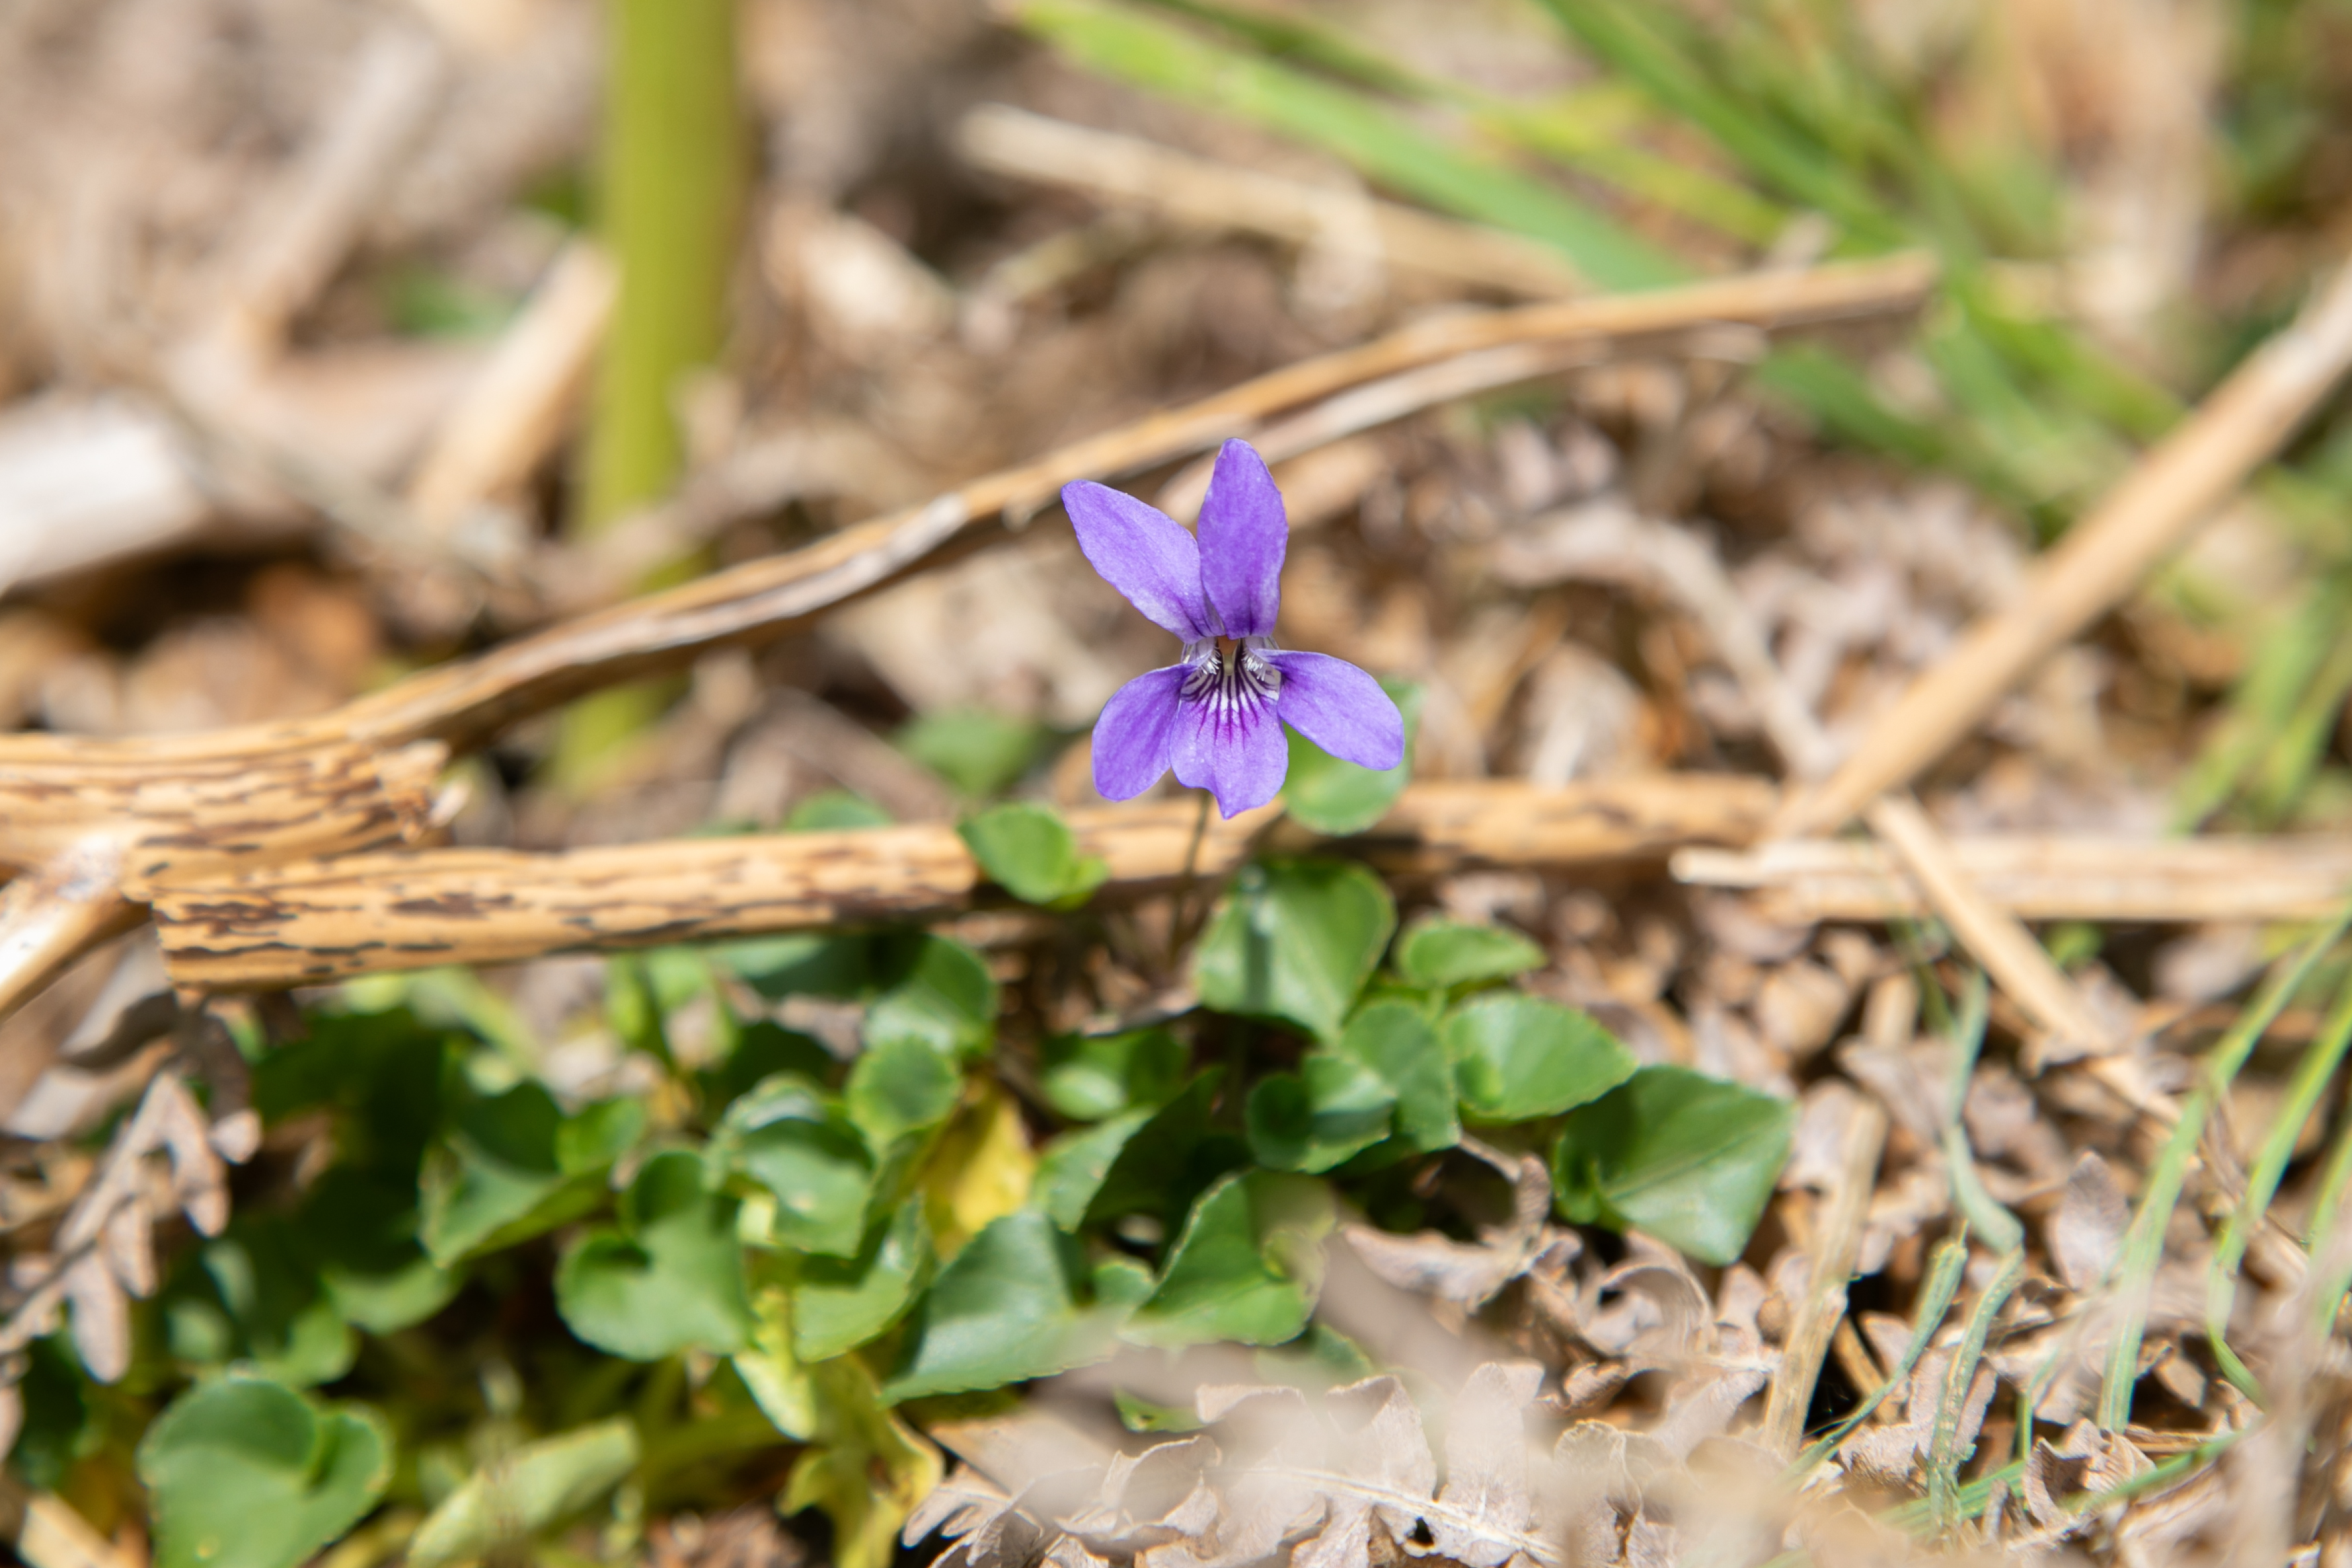 The small purple flower of common dog-violet growing close to the ground among twigs